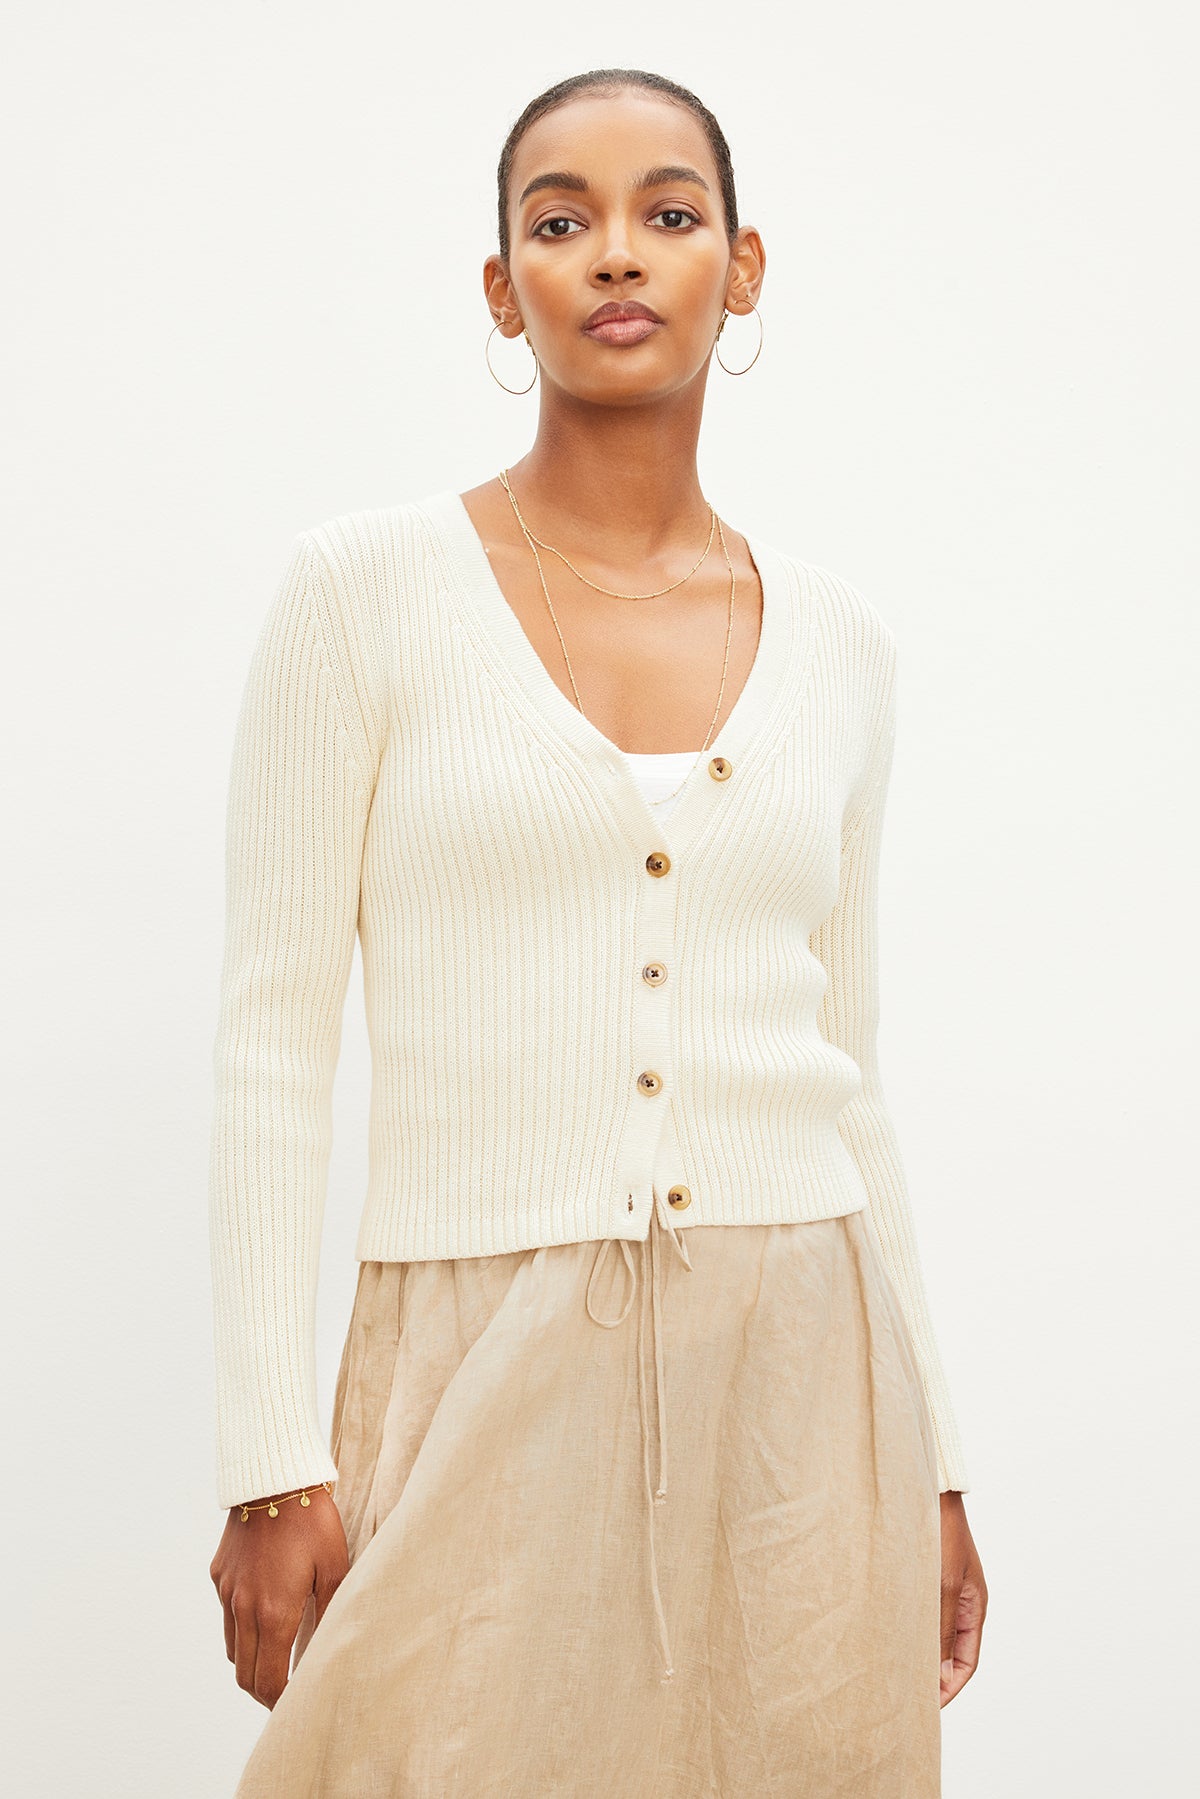 The model is showcasing a versatile choice by wearing a HYDIE BUTTON FRONT CARDIGAN from Velvet by Graham & Spencer and a tan skirt, perfect for all seasons.-35967413747905